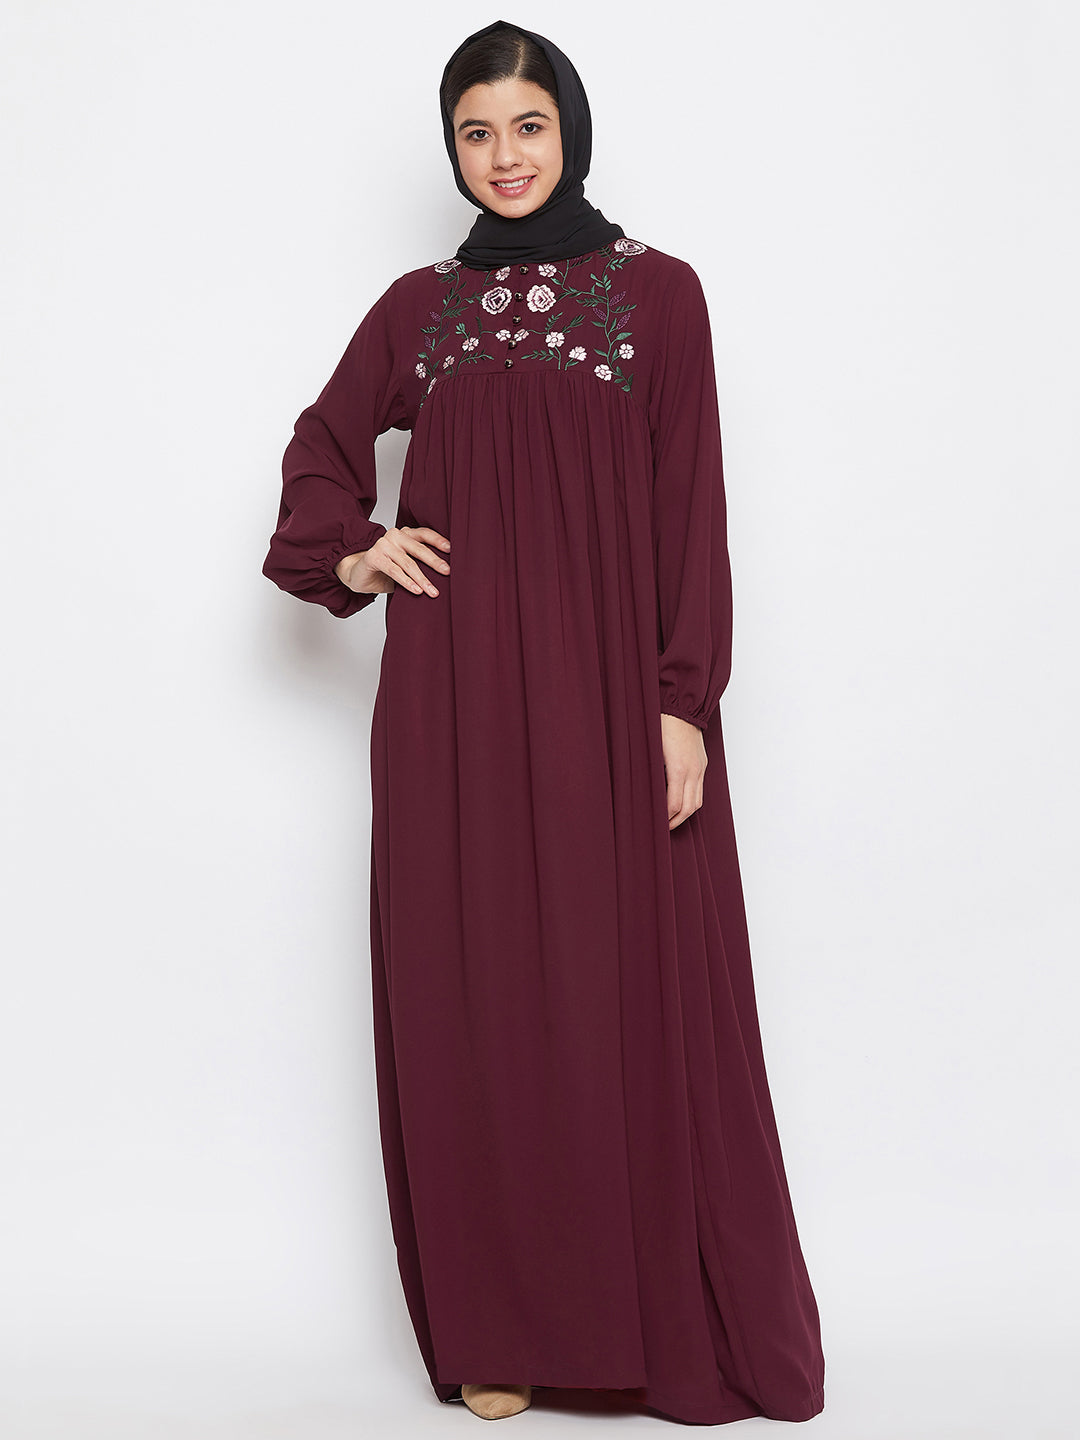 Maroon Chikan Hand Embroidery Work Abaya for Women with Black Georgette Scarf